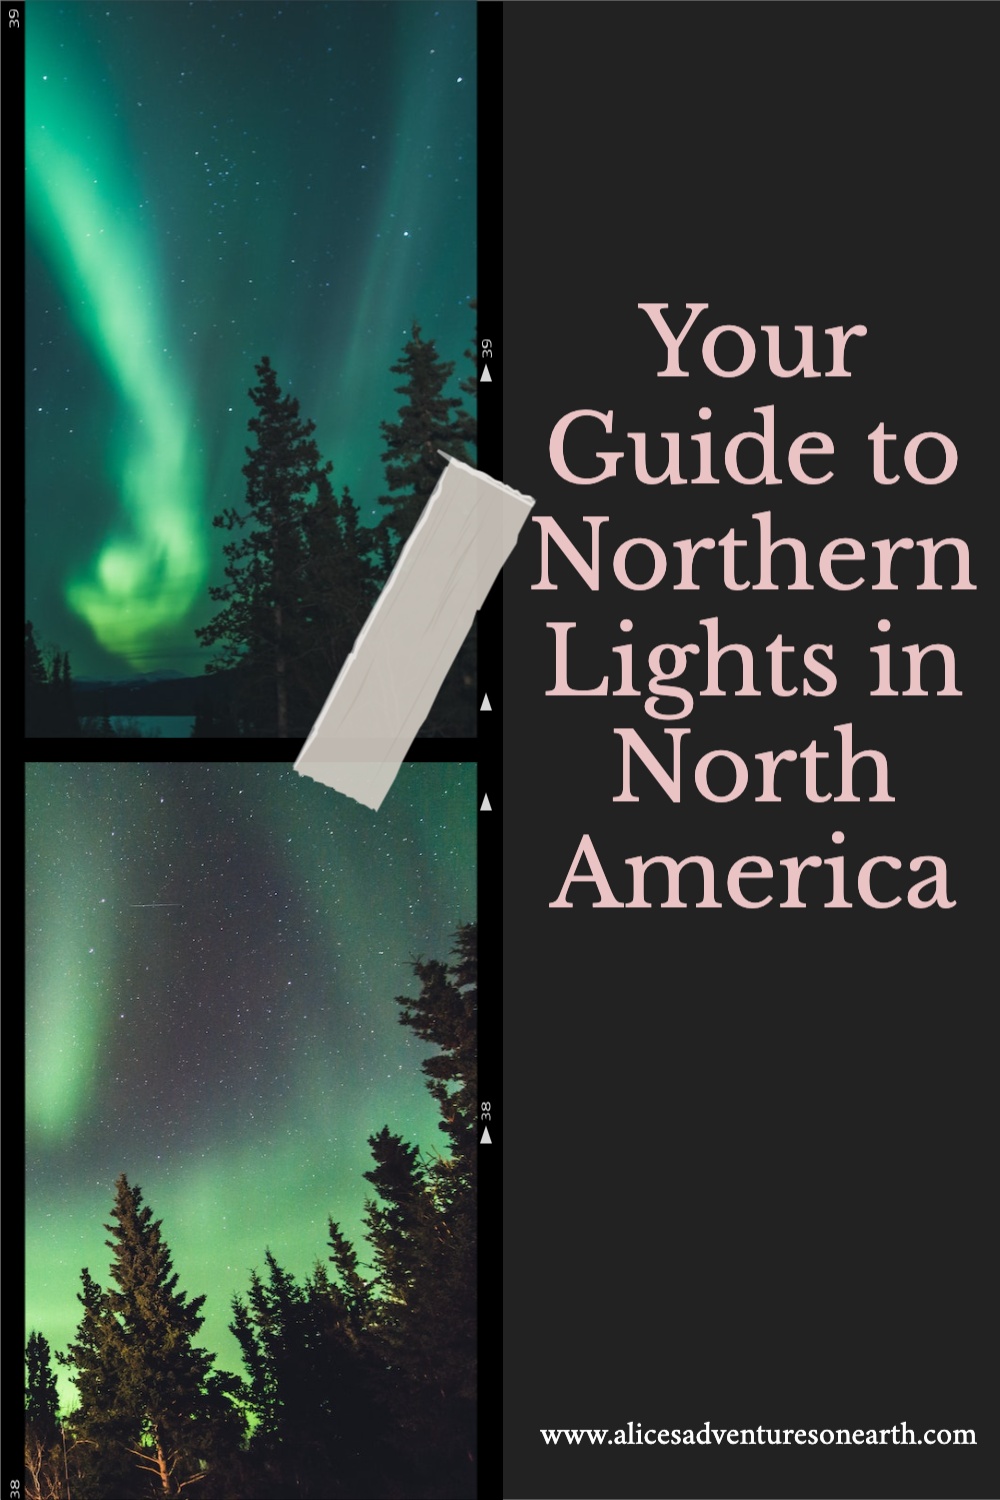 North America has some fantastic places to see the Northern lights. In this guide we cover some of the best places from the stunning Canadian Rockies, to Alaska. #northernlights 